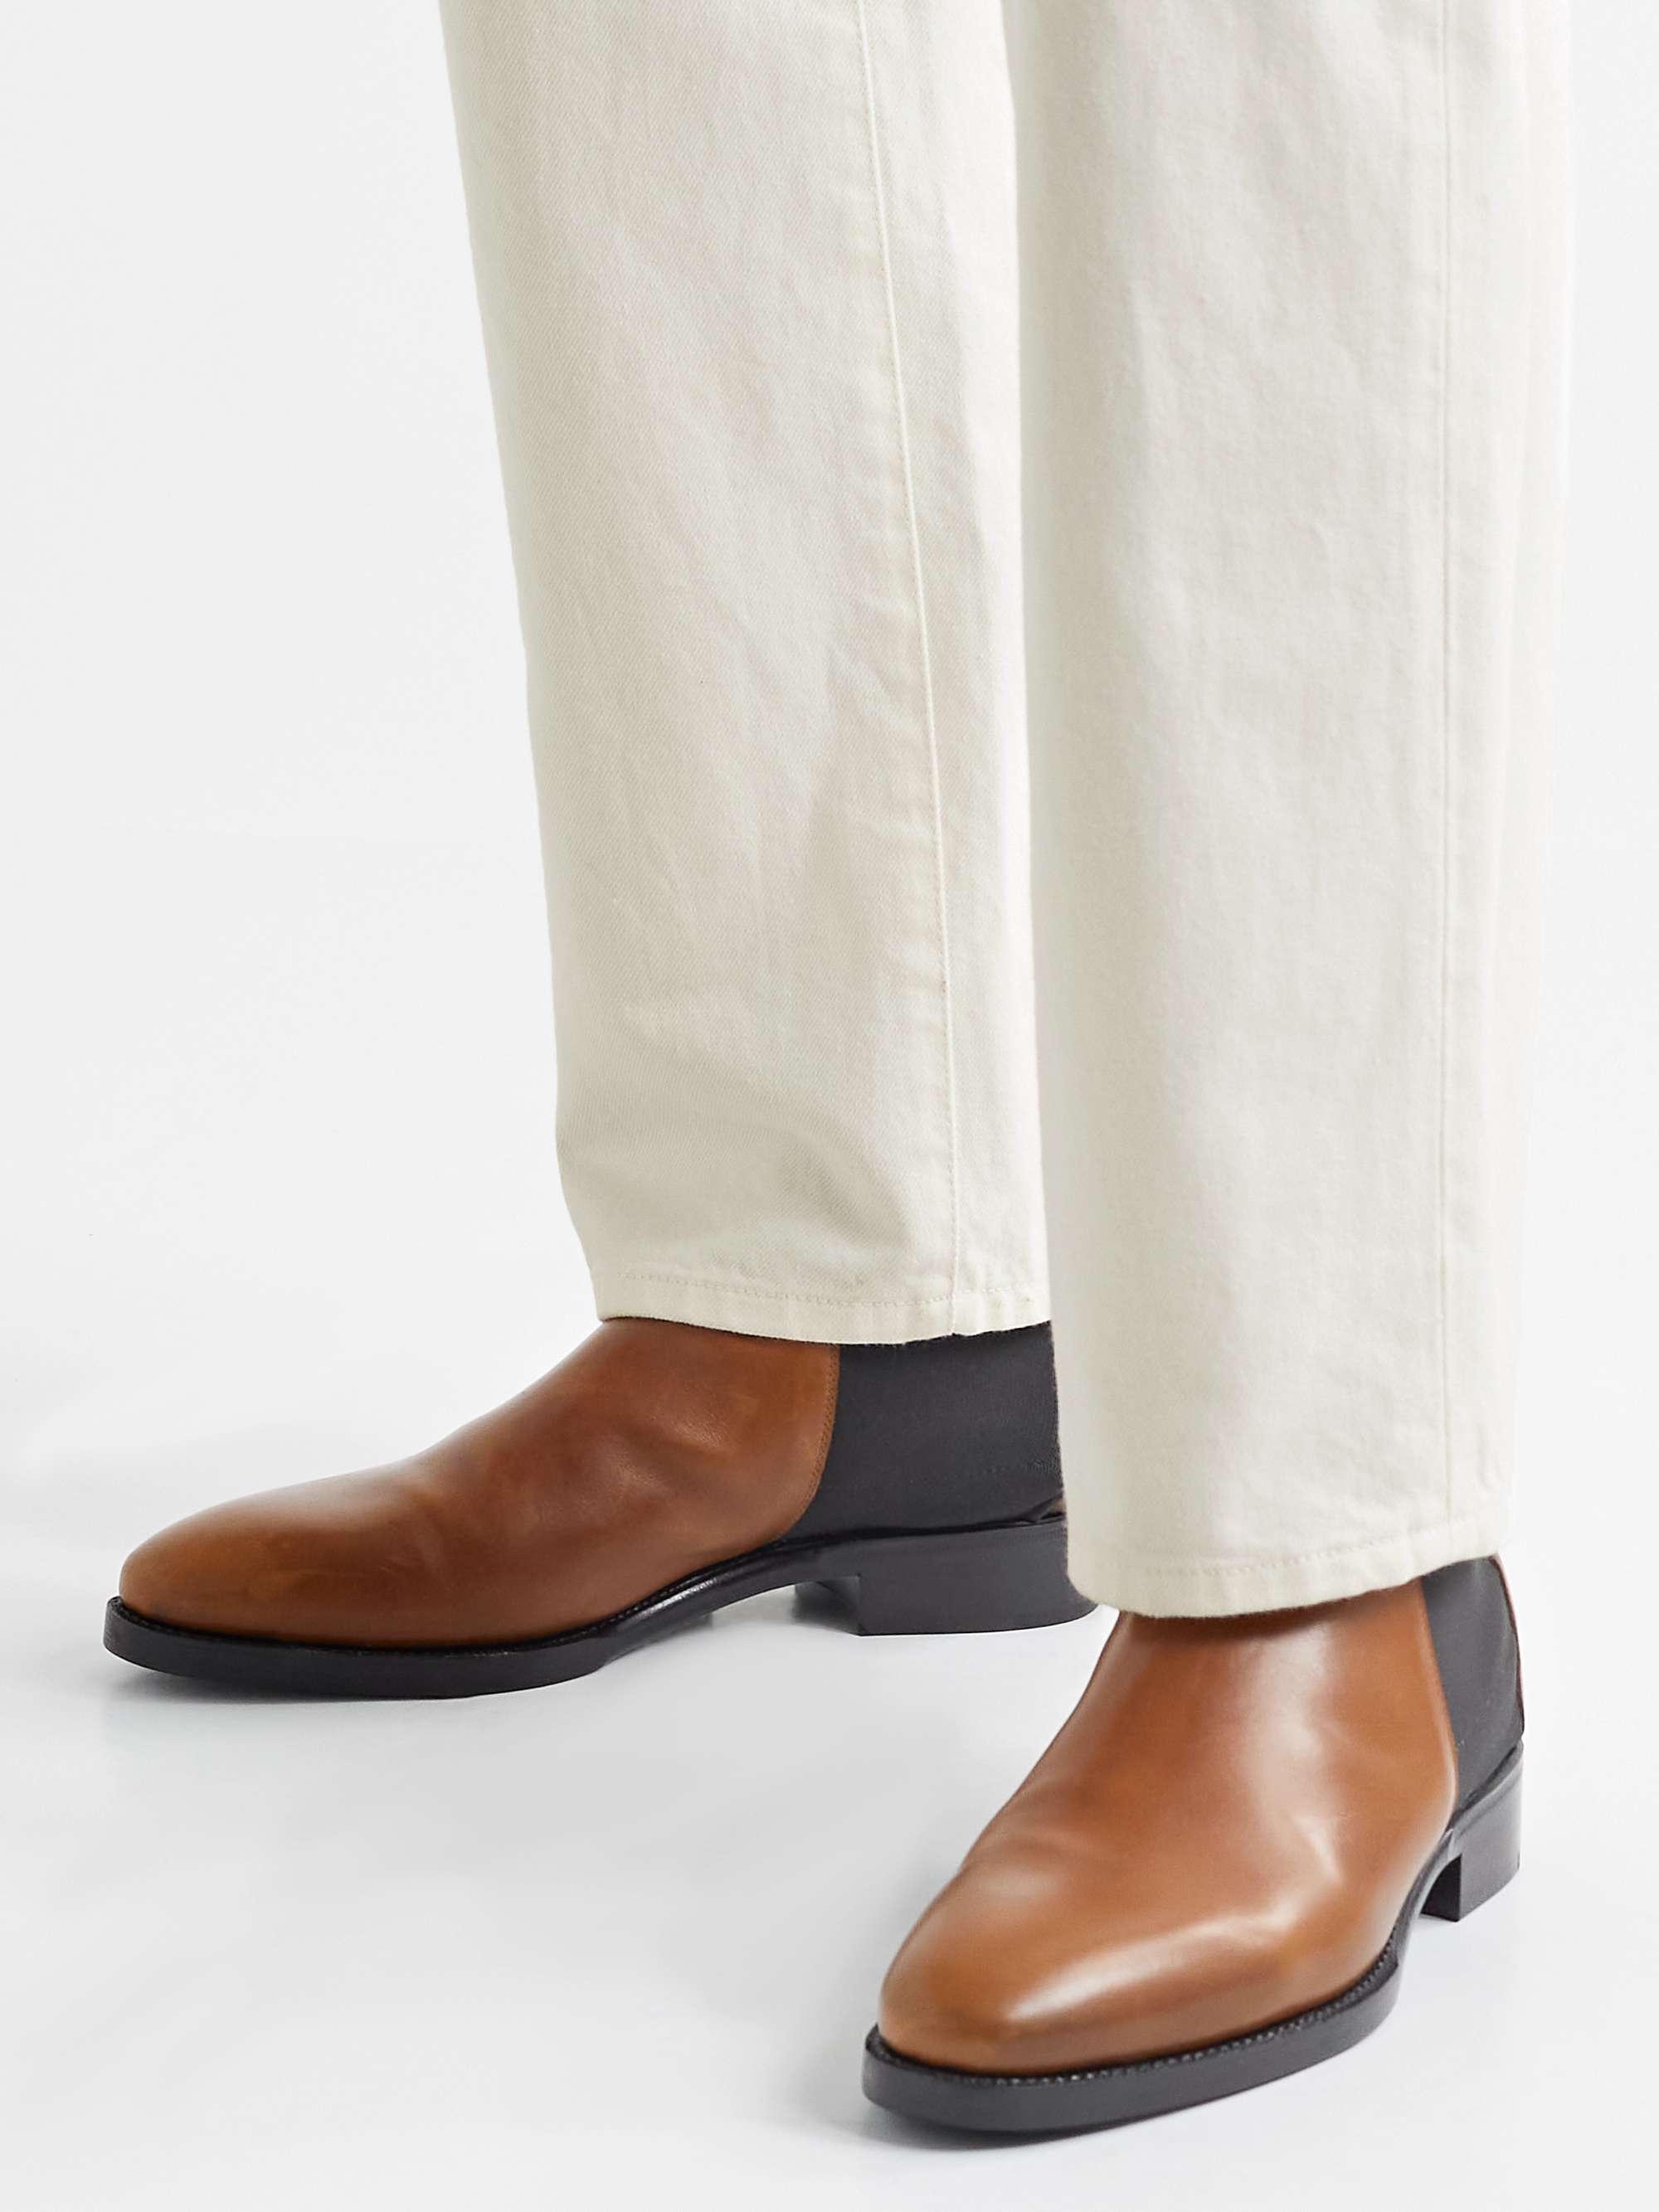 THE ROW Leather Chelsea Boots